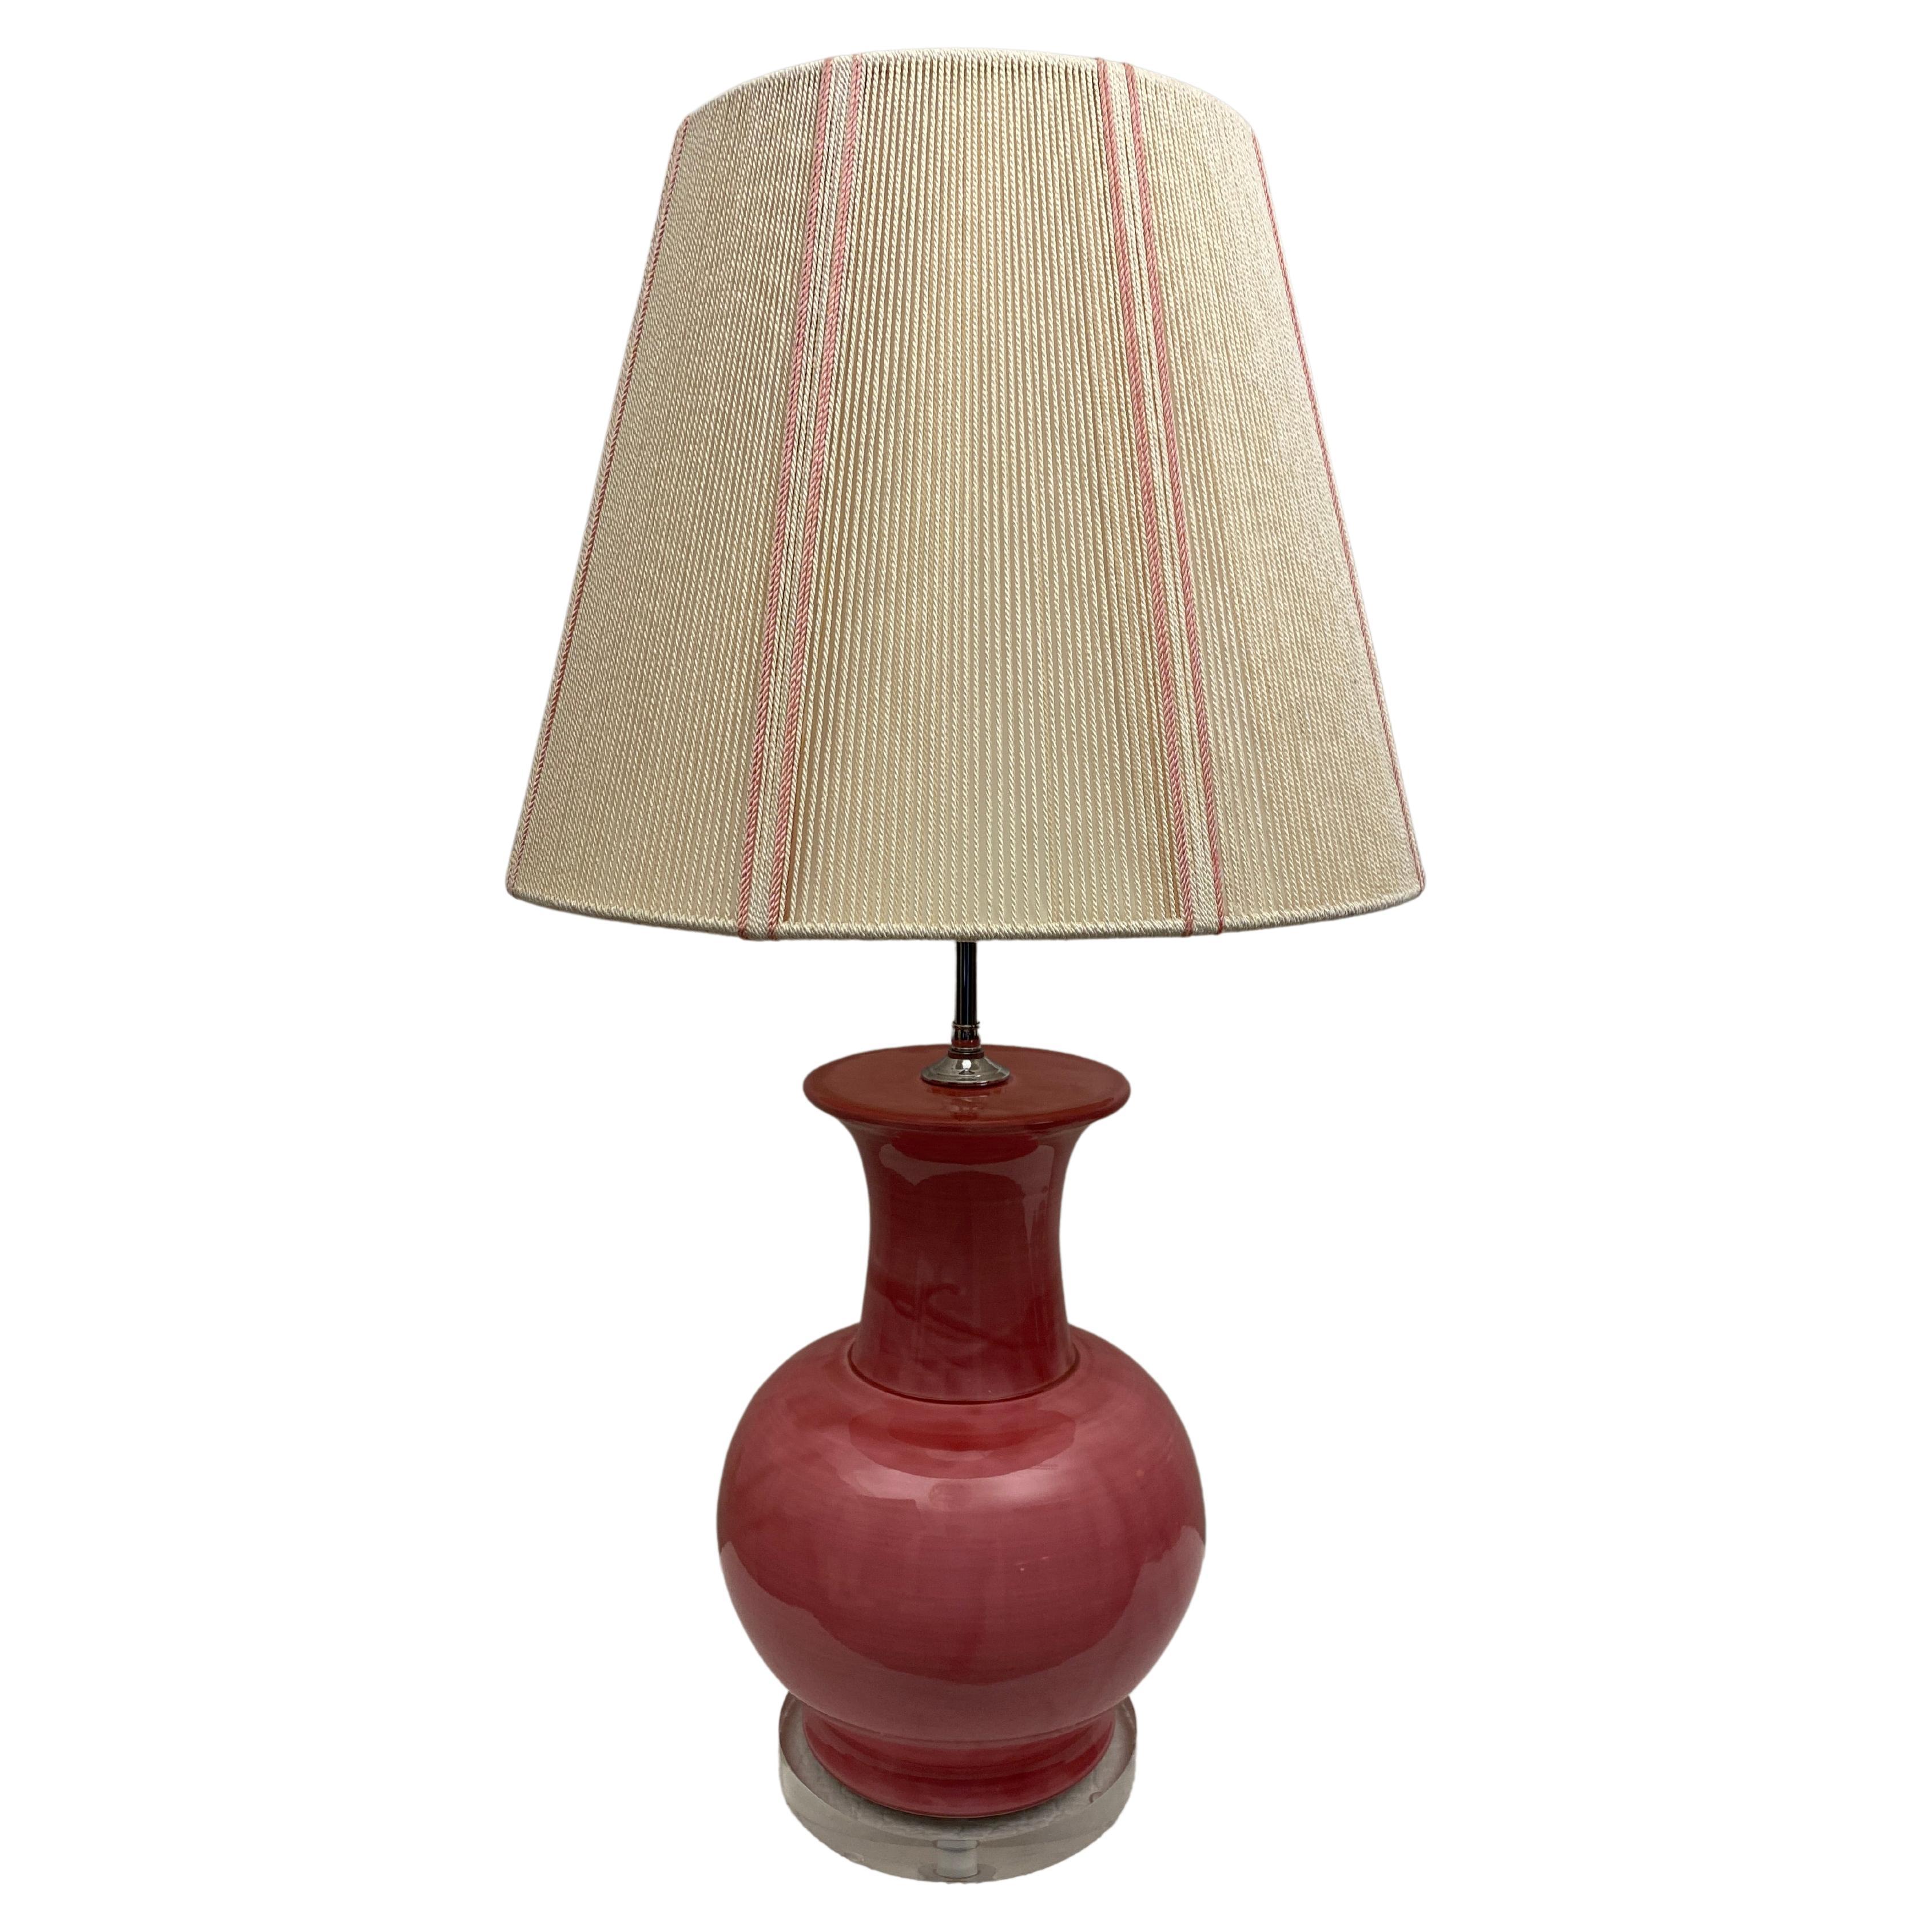 A fine quality pink glazed ceramic and lucite Table Lamp, circa 1980s. 
Newly rewired.

This pale pink glazed ceramic table lamp with a lucite base and final is in perfect vintage condition. The lucite base makes the lamp taller and more chic.